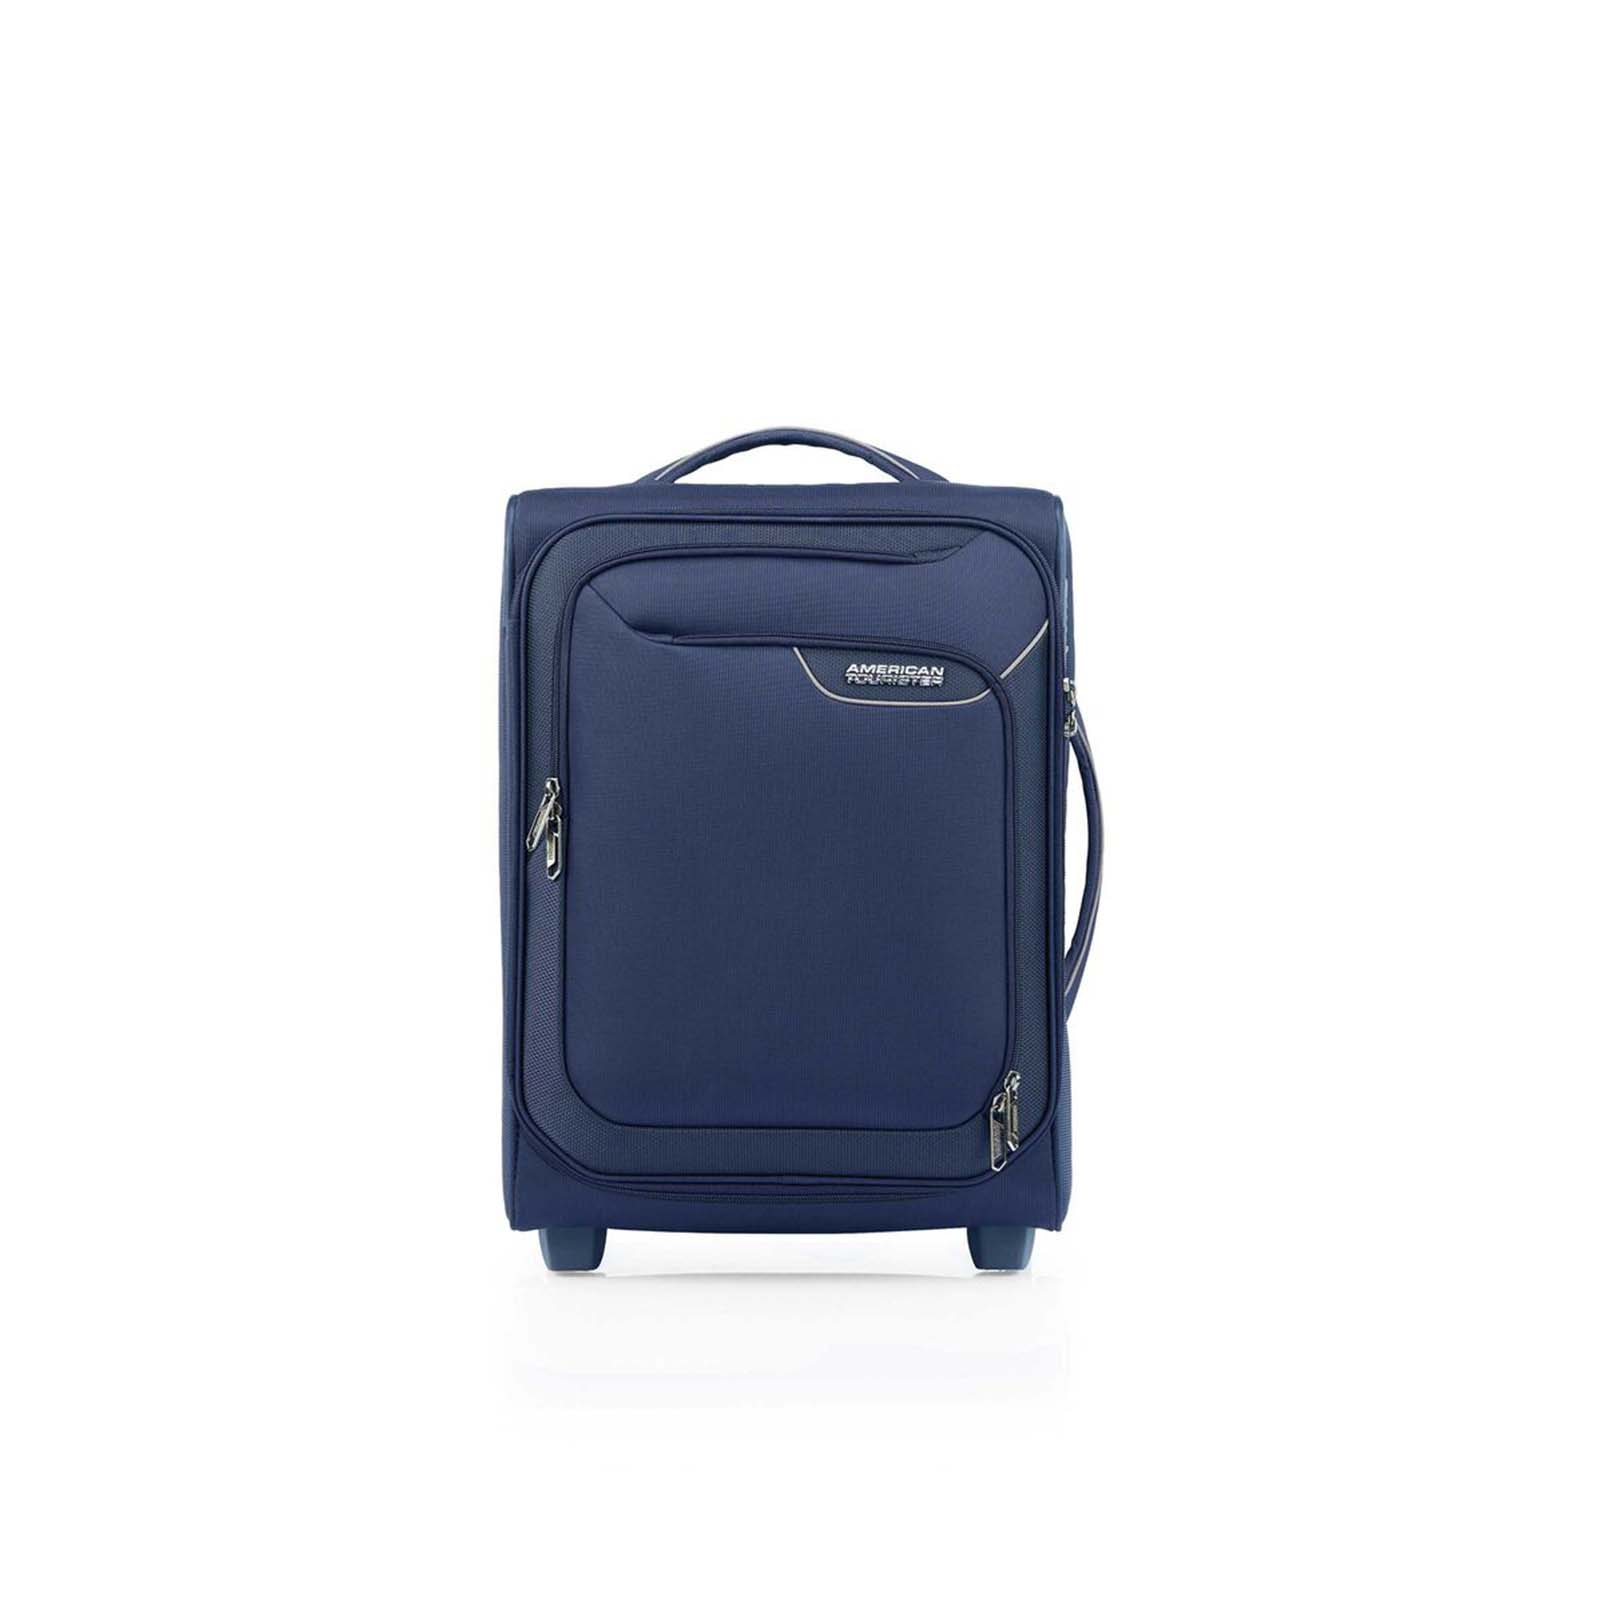 American-Tourister-Applite-4-Eco-50cm-Carry-On-Suitcase-Navy-Front